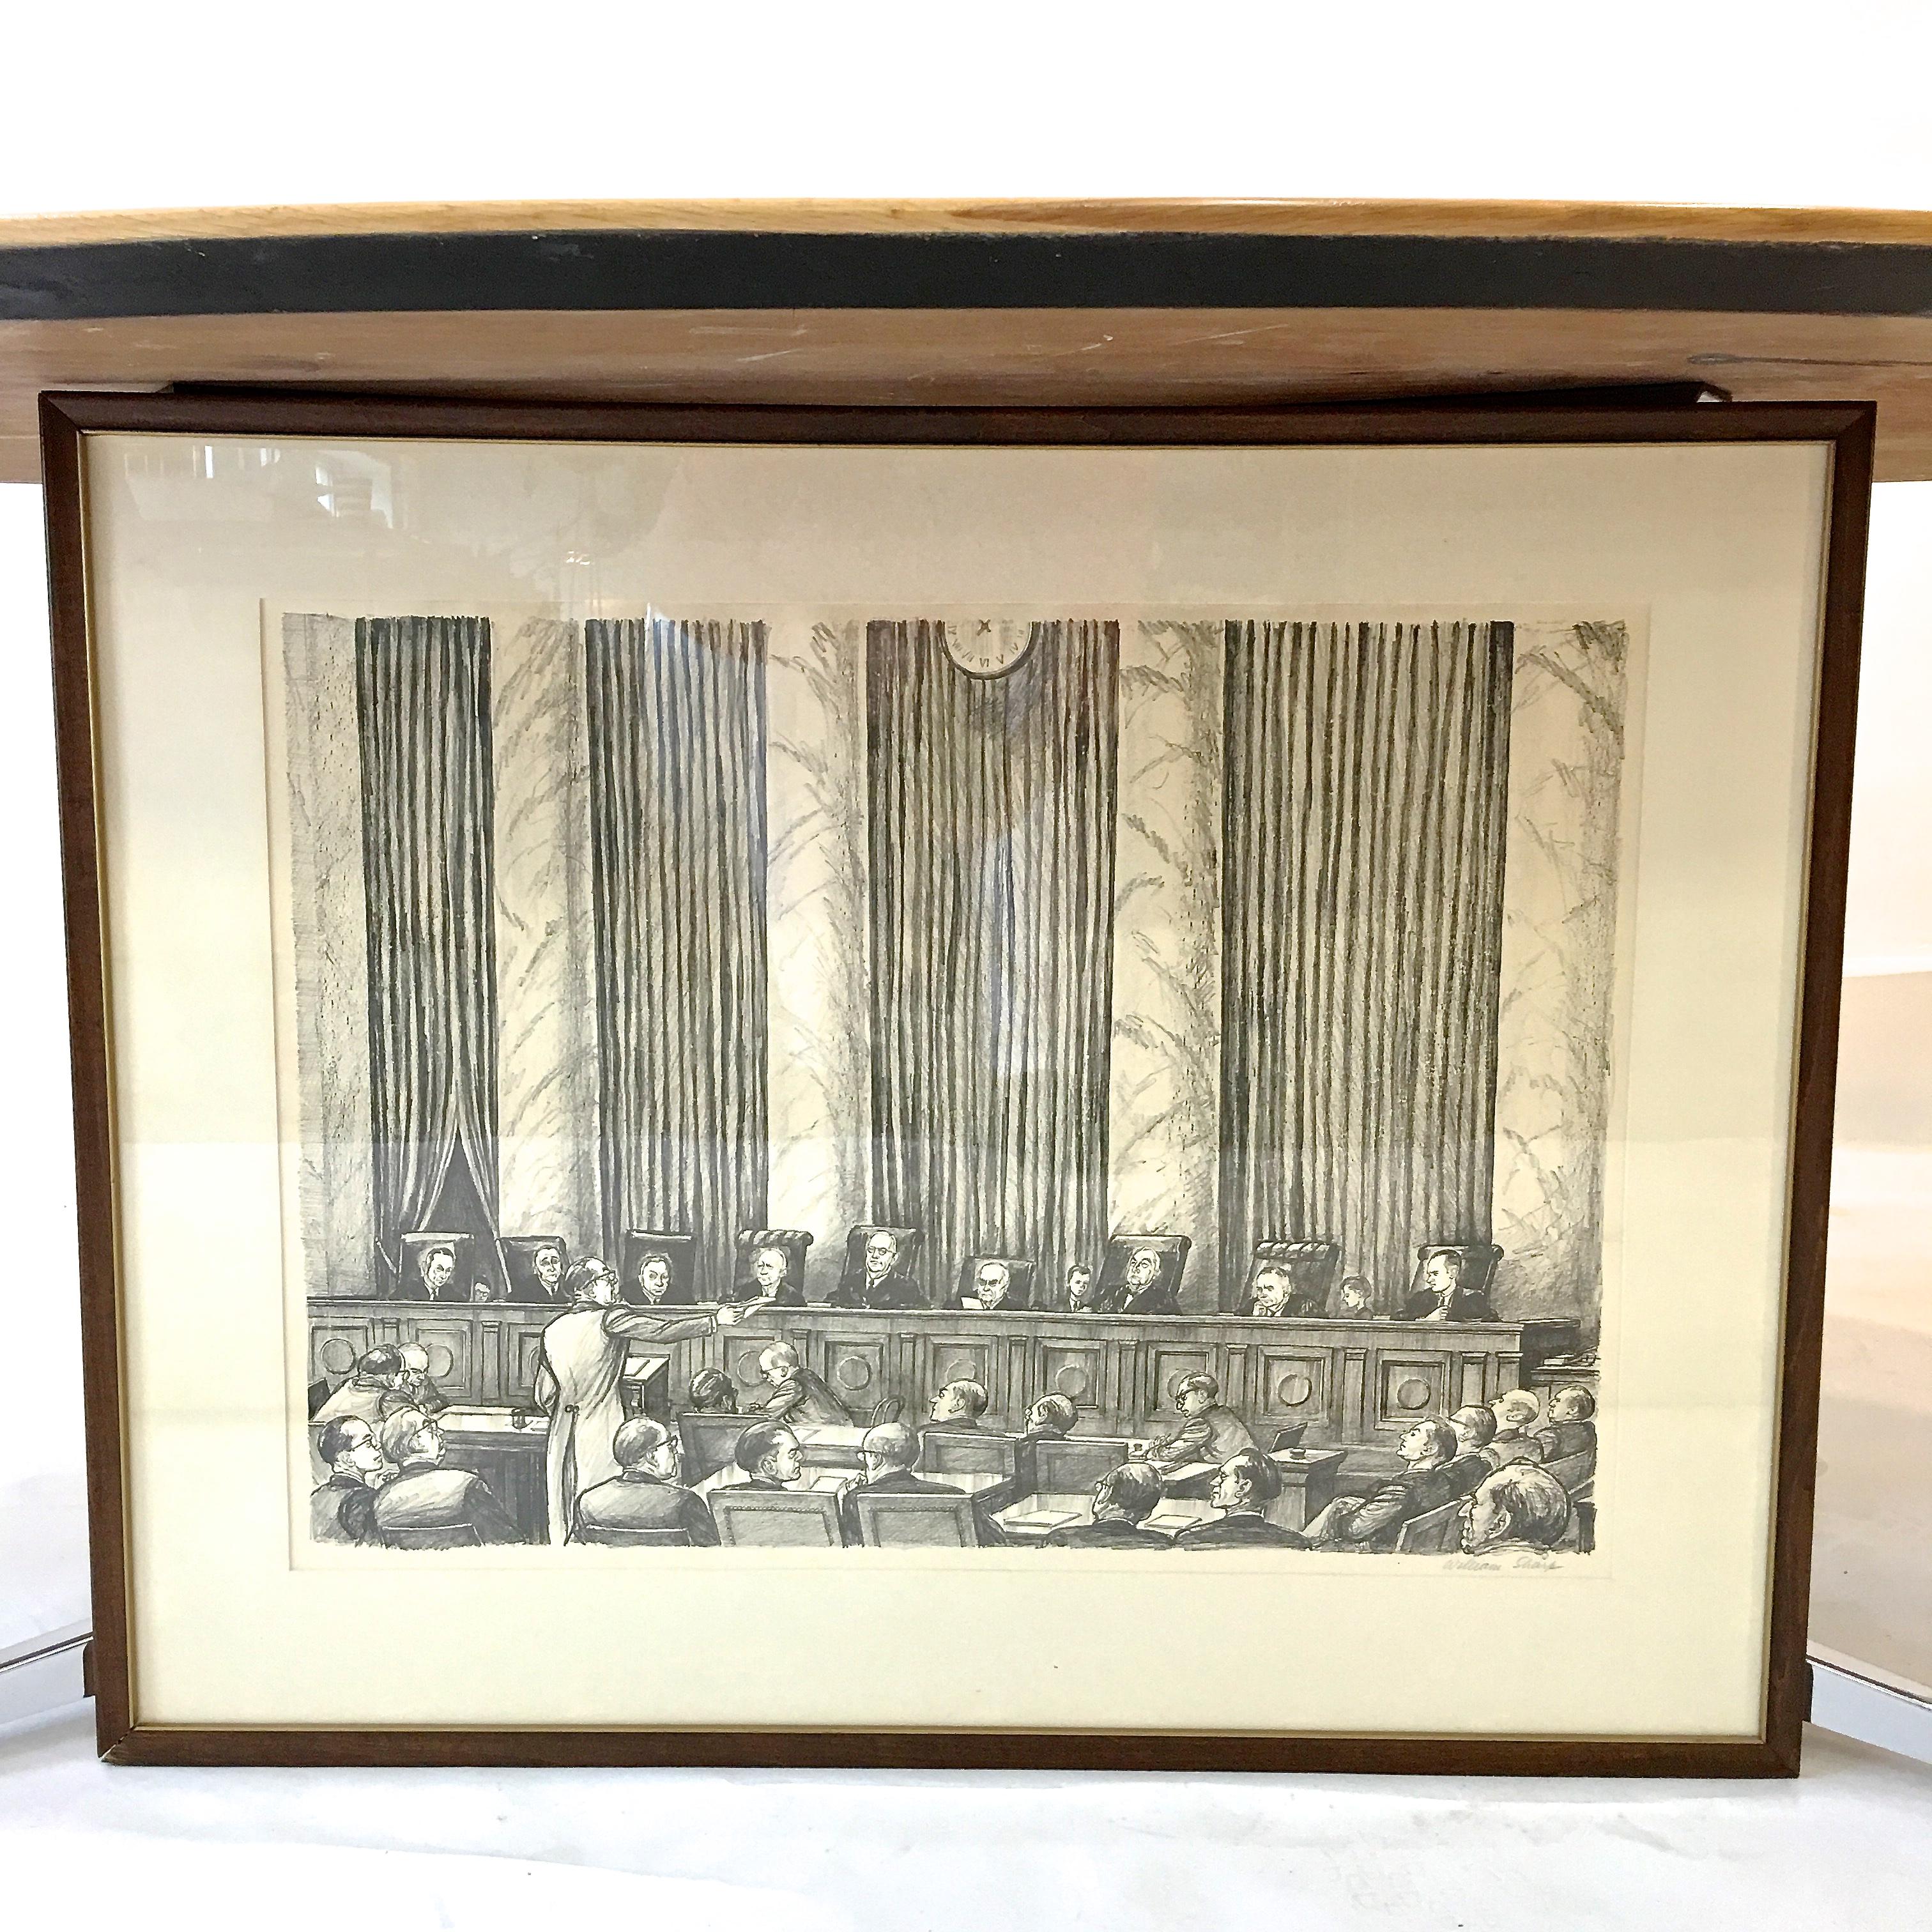 An original framed and matted lithograph by William Sharp of the Supreme Court of the United States circa 1960. Signed.

William Sharp, 1900 - 1961

Justices:
Charles Evans Whittaker, 1901 - 1973
John Marshall Harlan, Jr., 20 May 1899 - 29 Dec